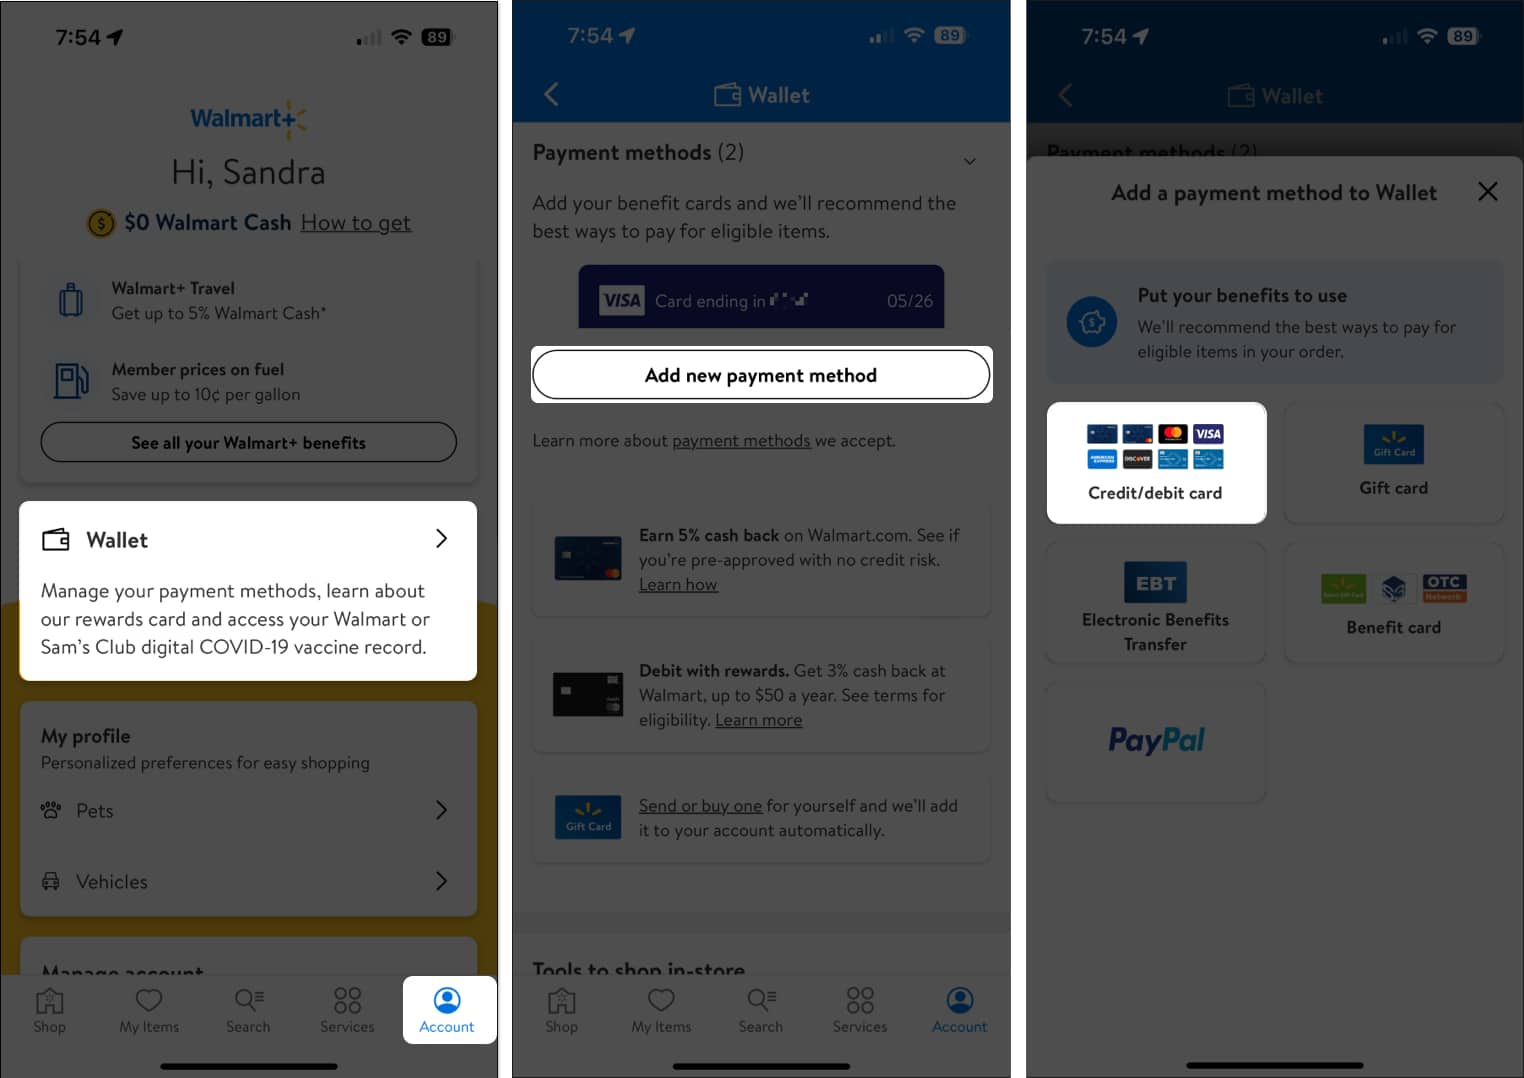 Open Walmart app and add a new payment method